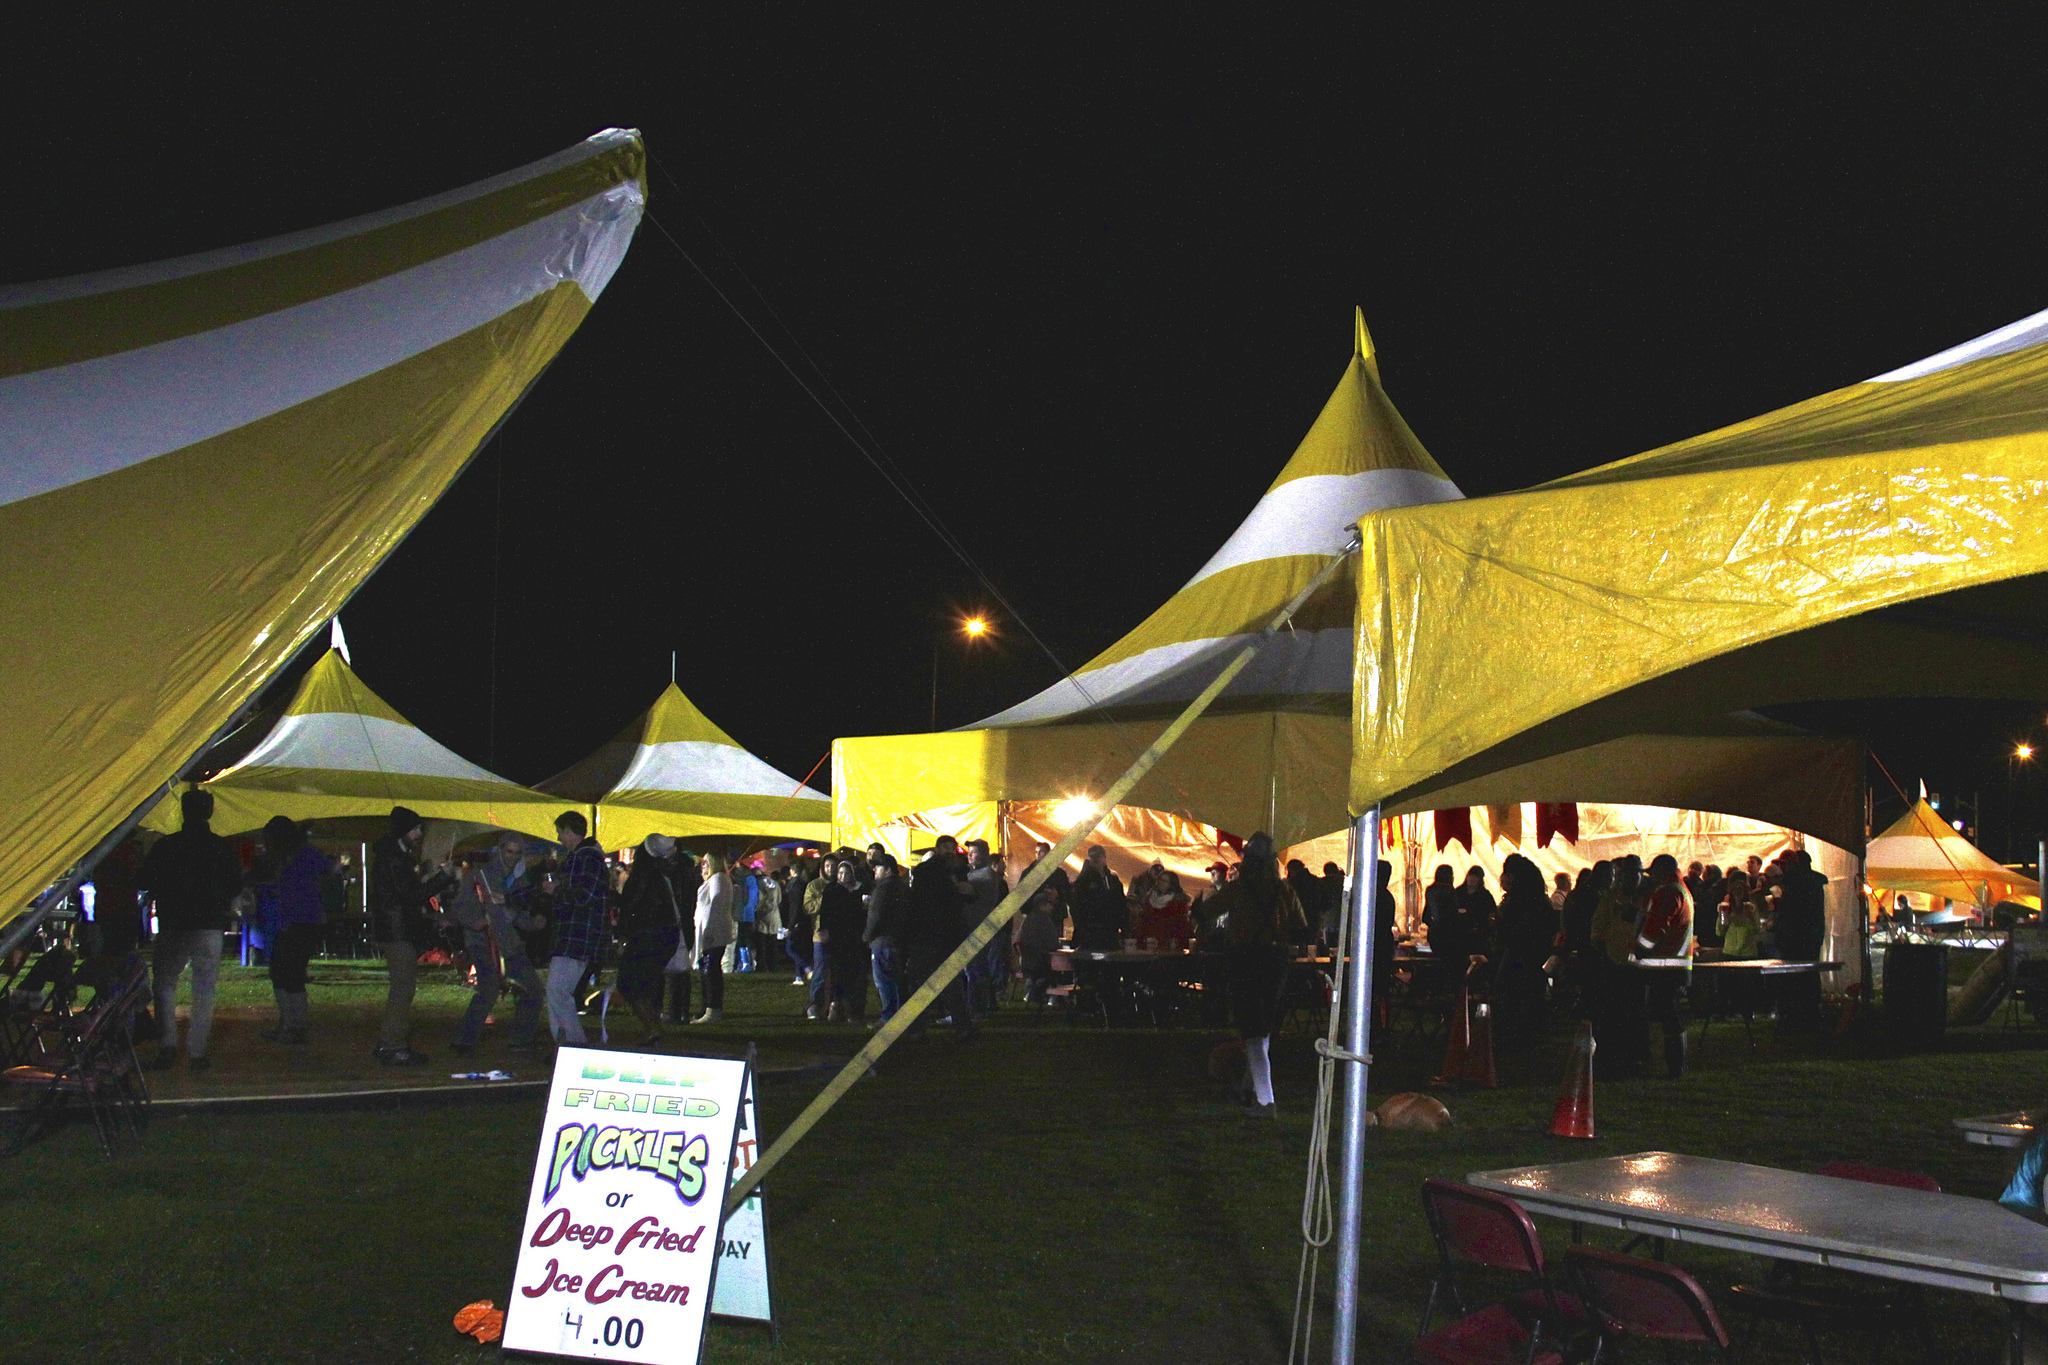 NLFB rents tents and other event equipment at competitive prices.